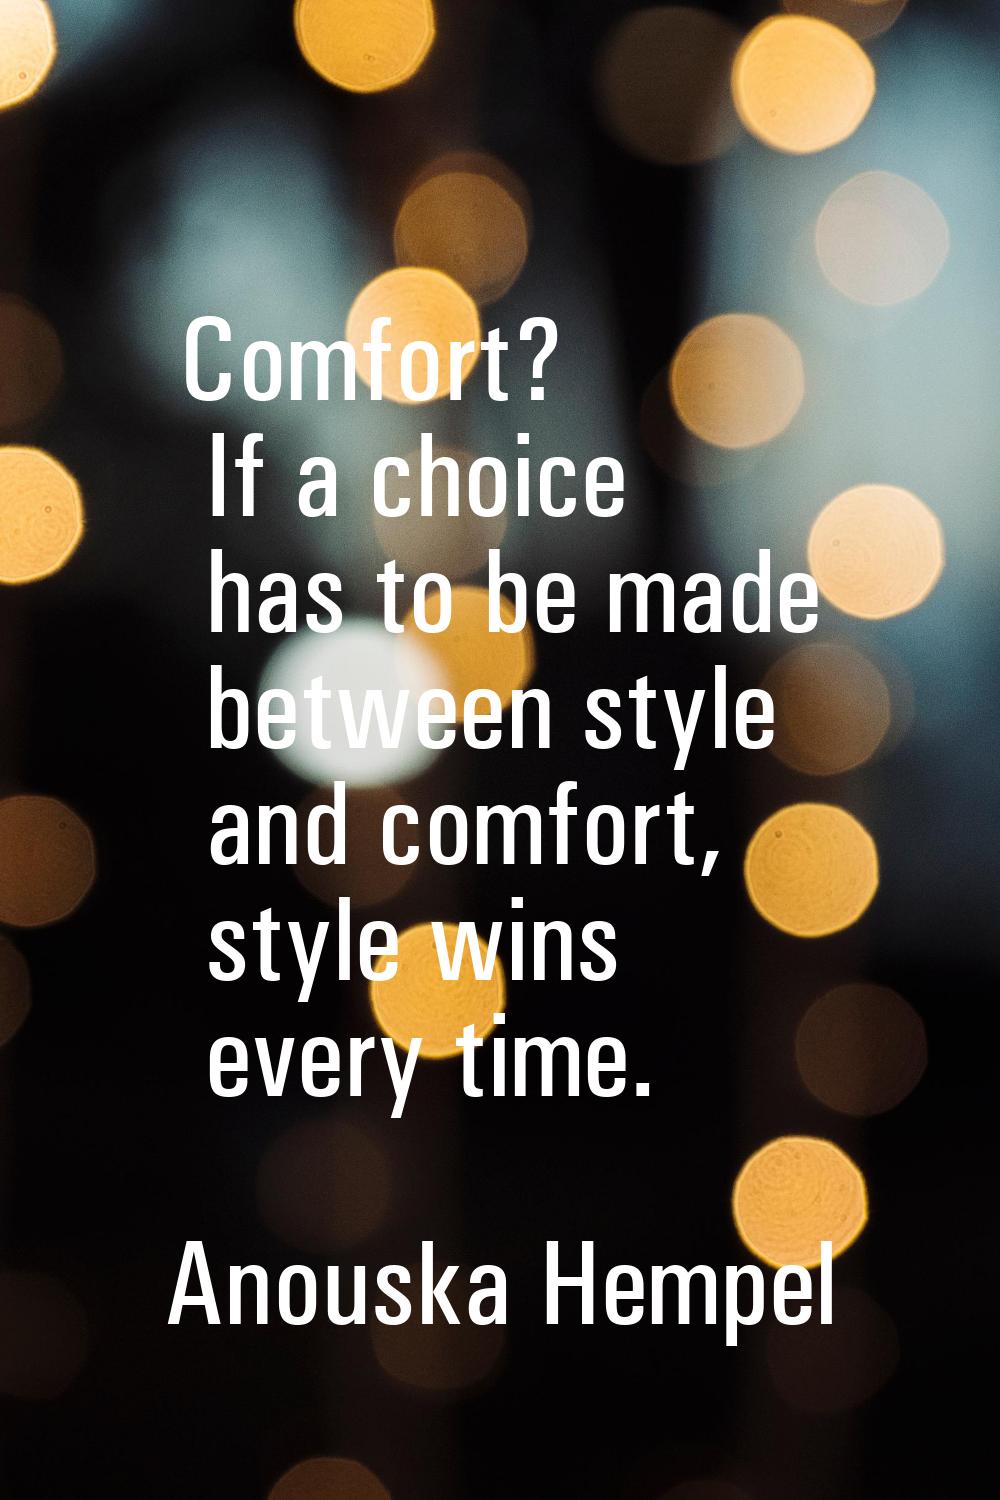 Comfort? If a choice has to be made between style and comfort, style wins every time.